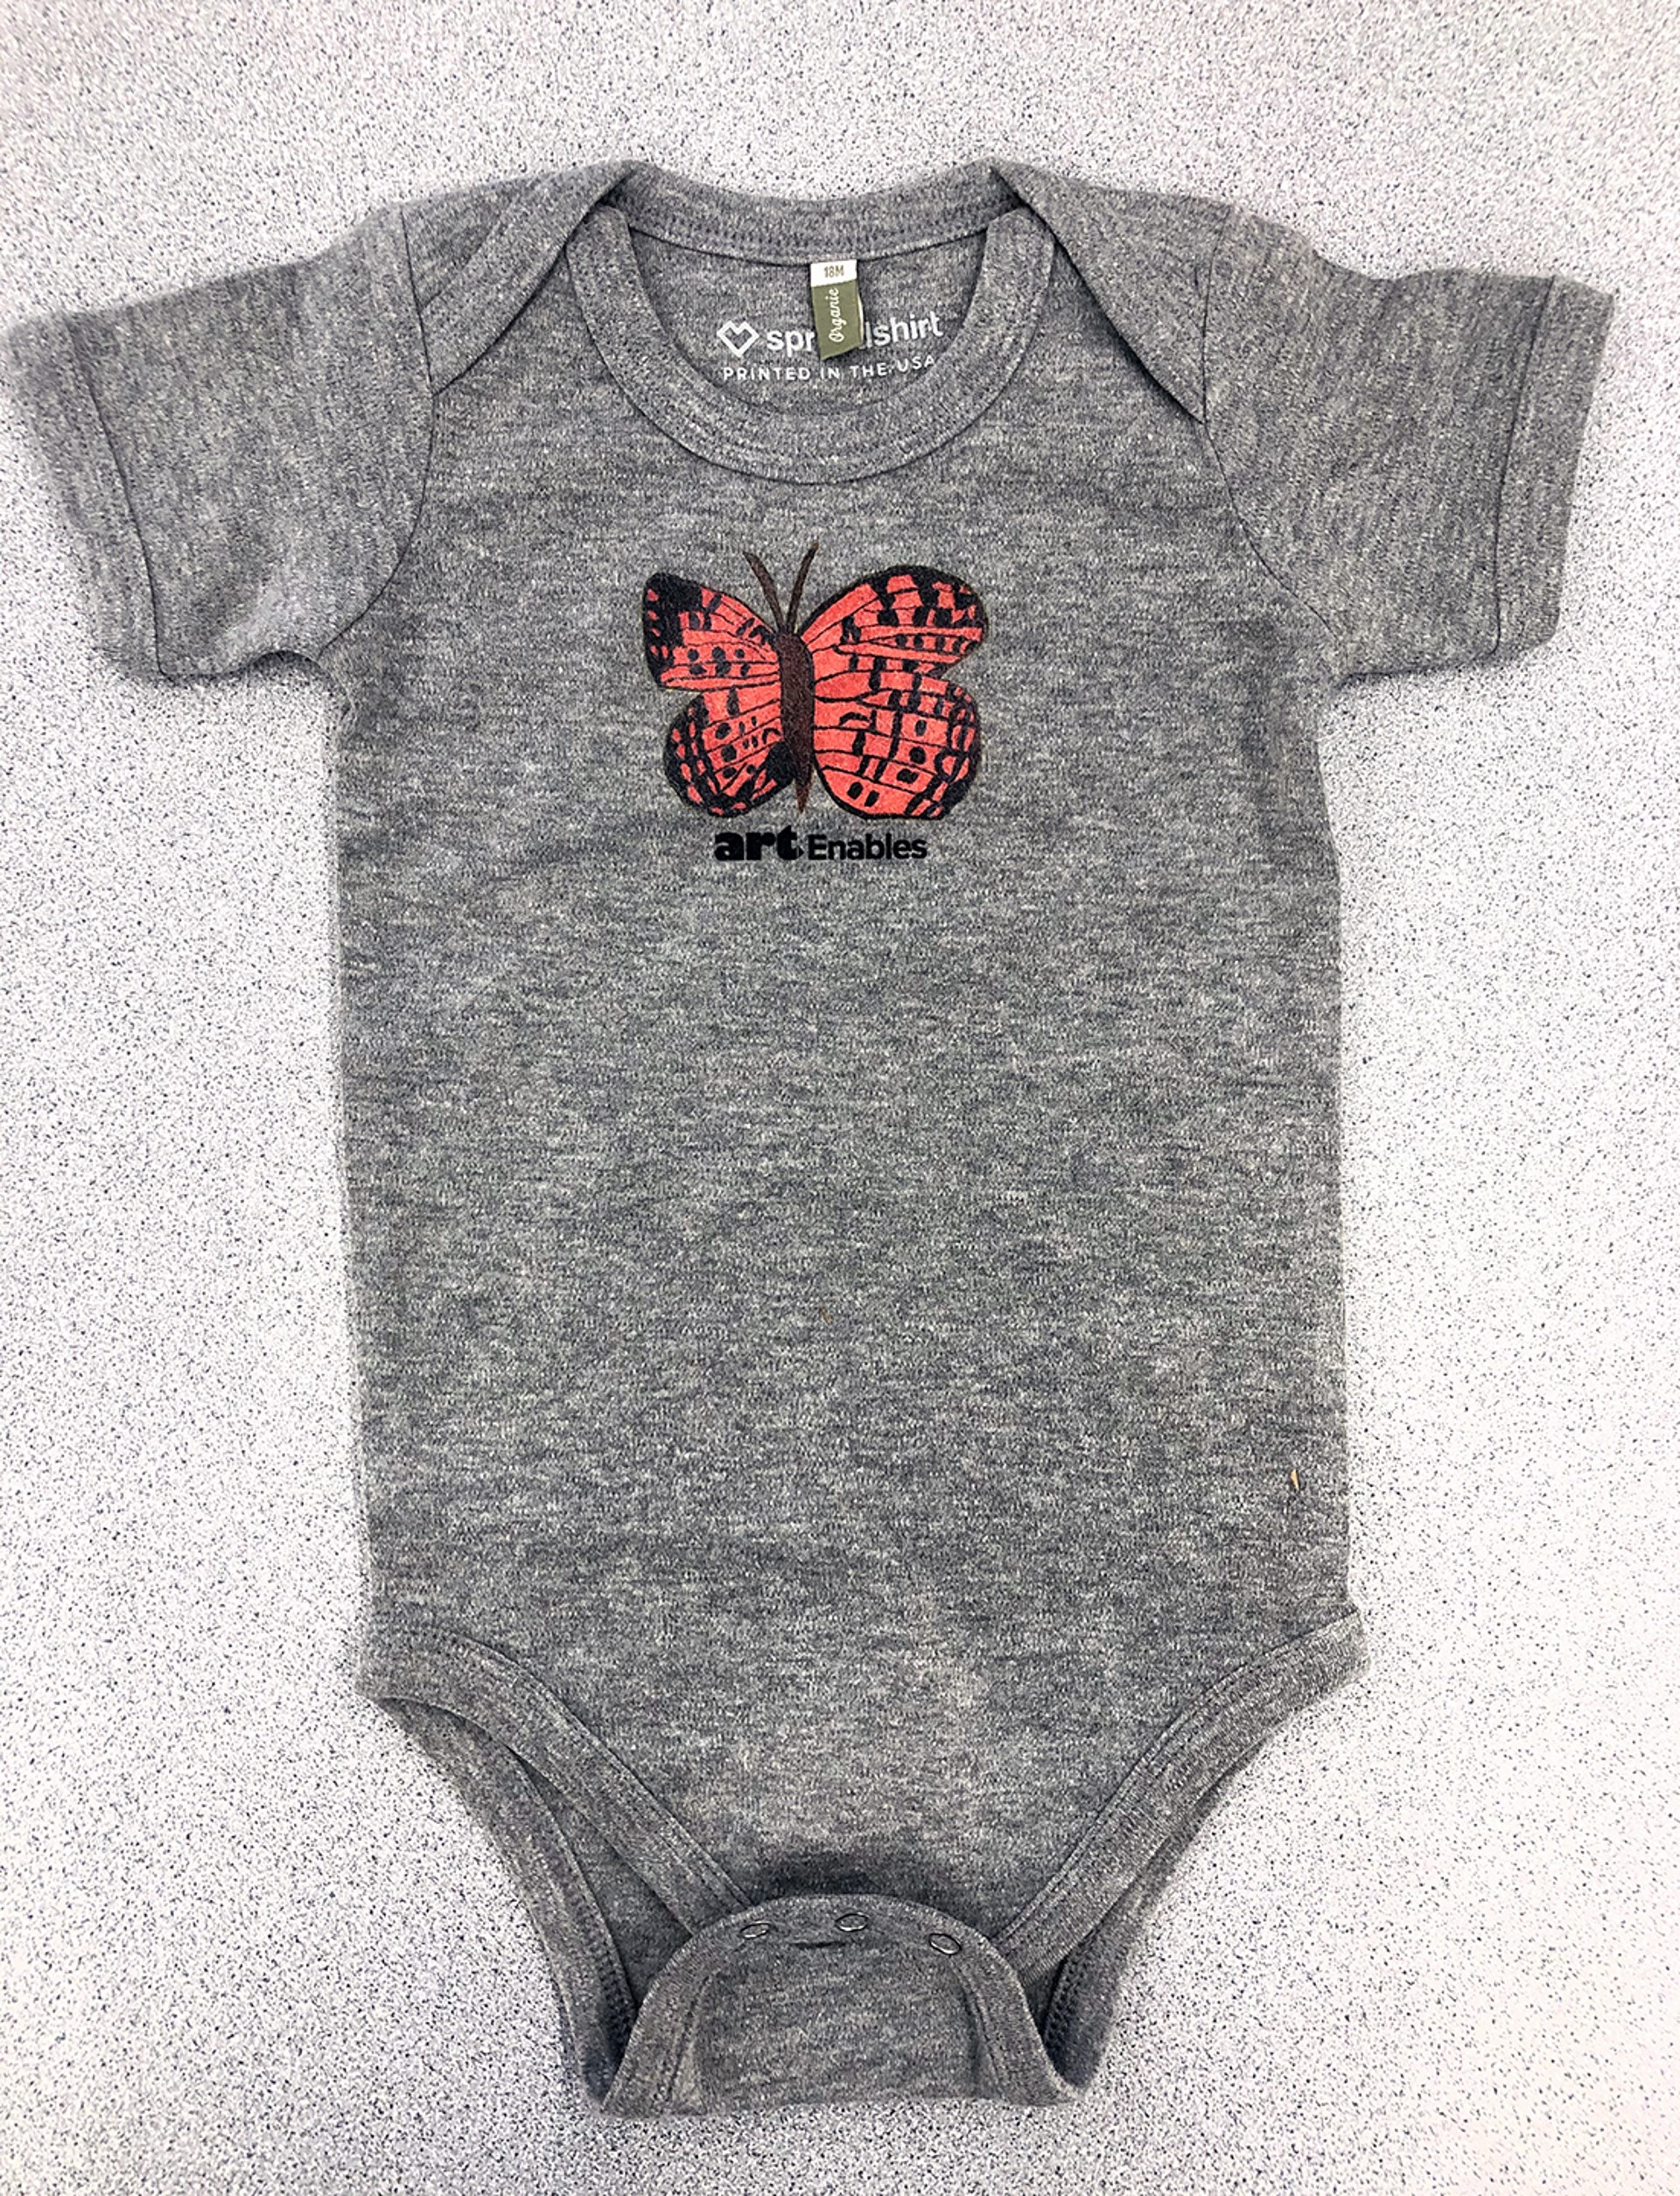 Unisex Baby Onesie - Butterfly (Paul Lewis) - 6 months (heather gray) by Art Enables Merchandise